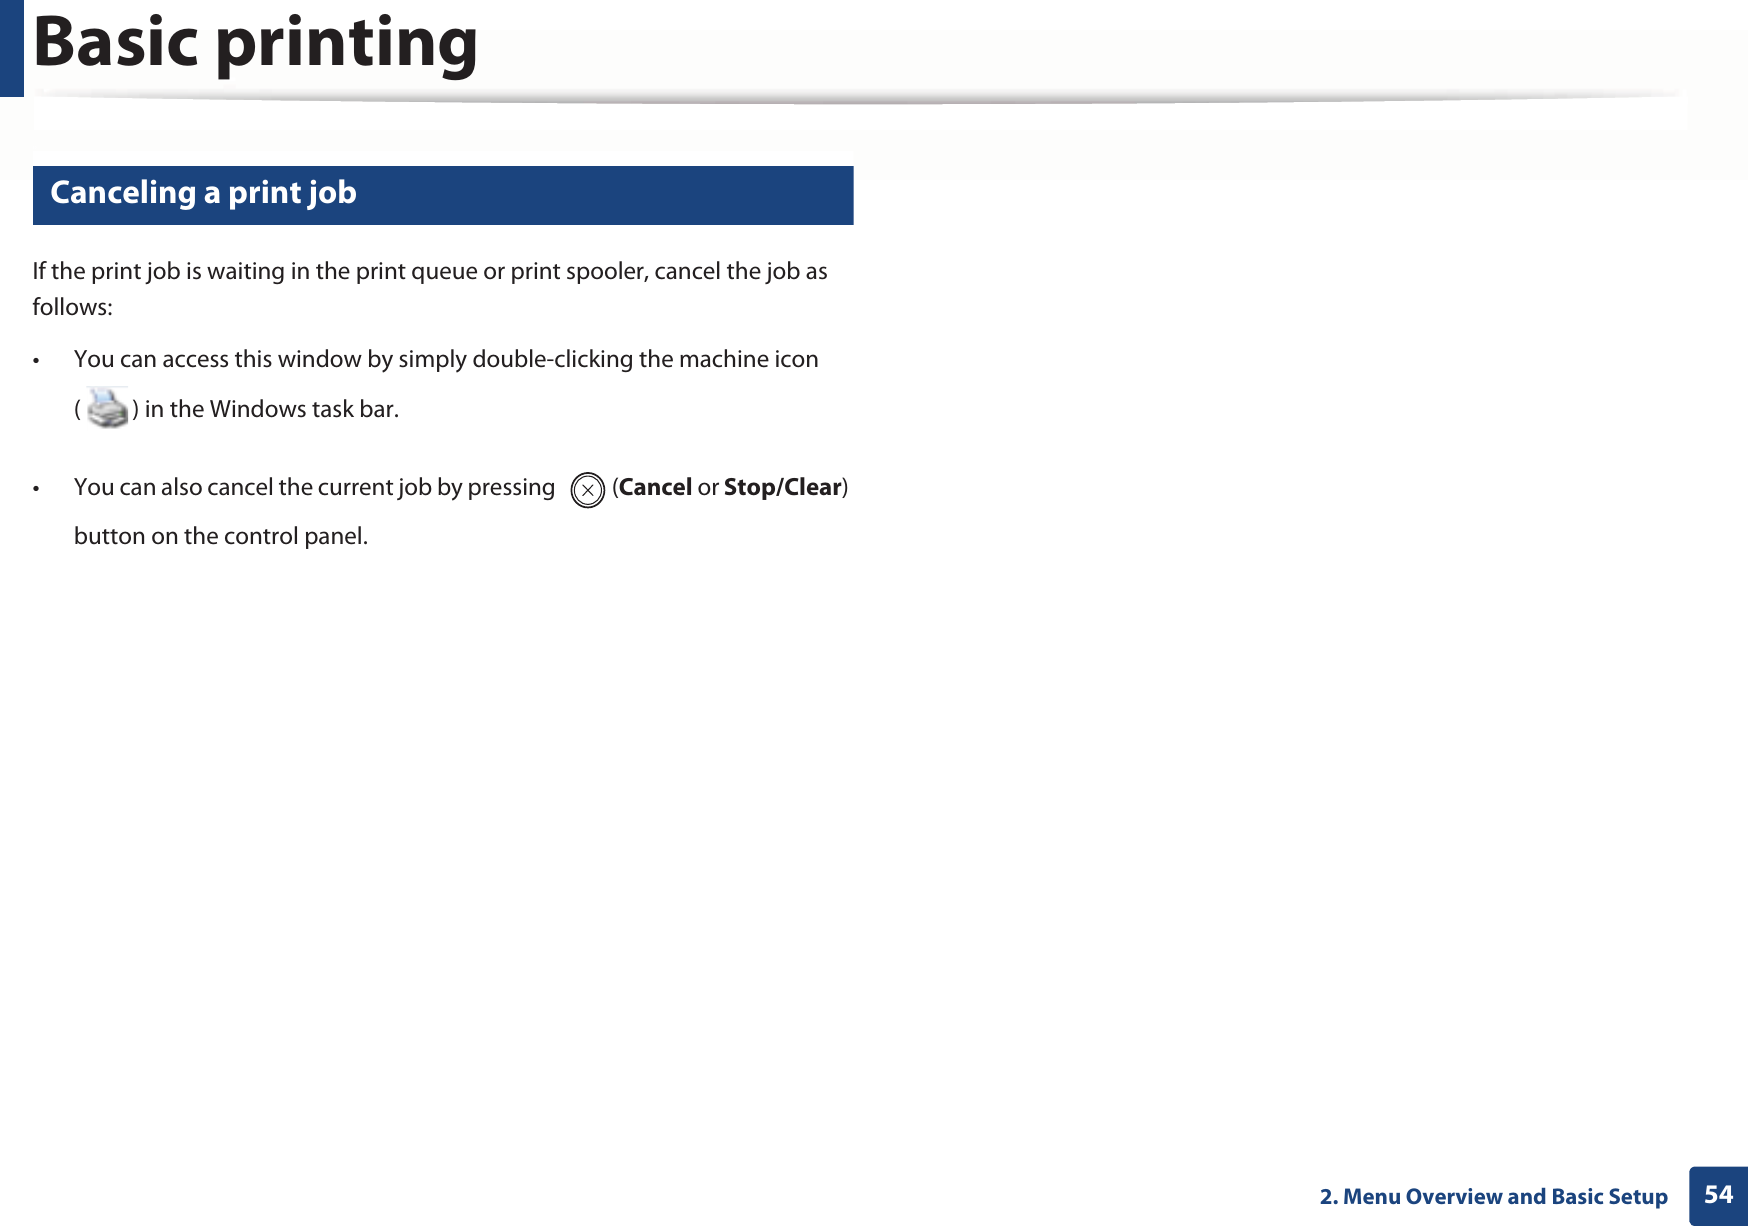 Basic printing542. Menu Overview and Basic Setup10 Canceling a print jobIf the print job is waiting in the print queue or print spooler, cancel the job as follows:• You can access this window by simply double-clicking the machine icon ( ) in the Windows task bar. • You can also cancel the current job by pressing  (Cancel or Stop/Clear) button on the control panel.